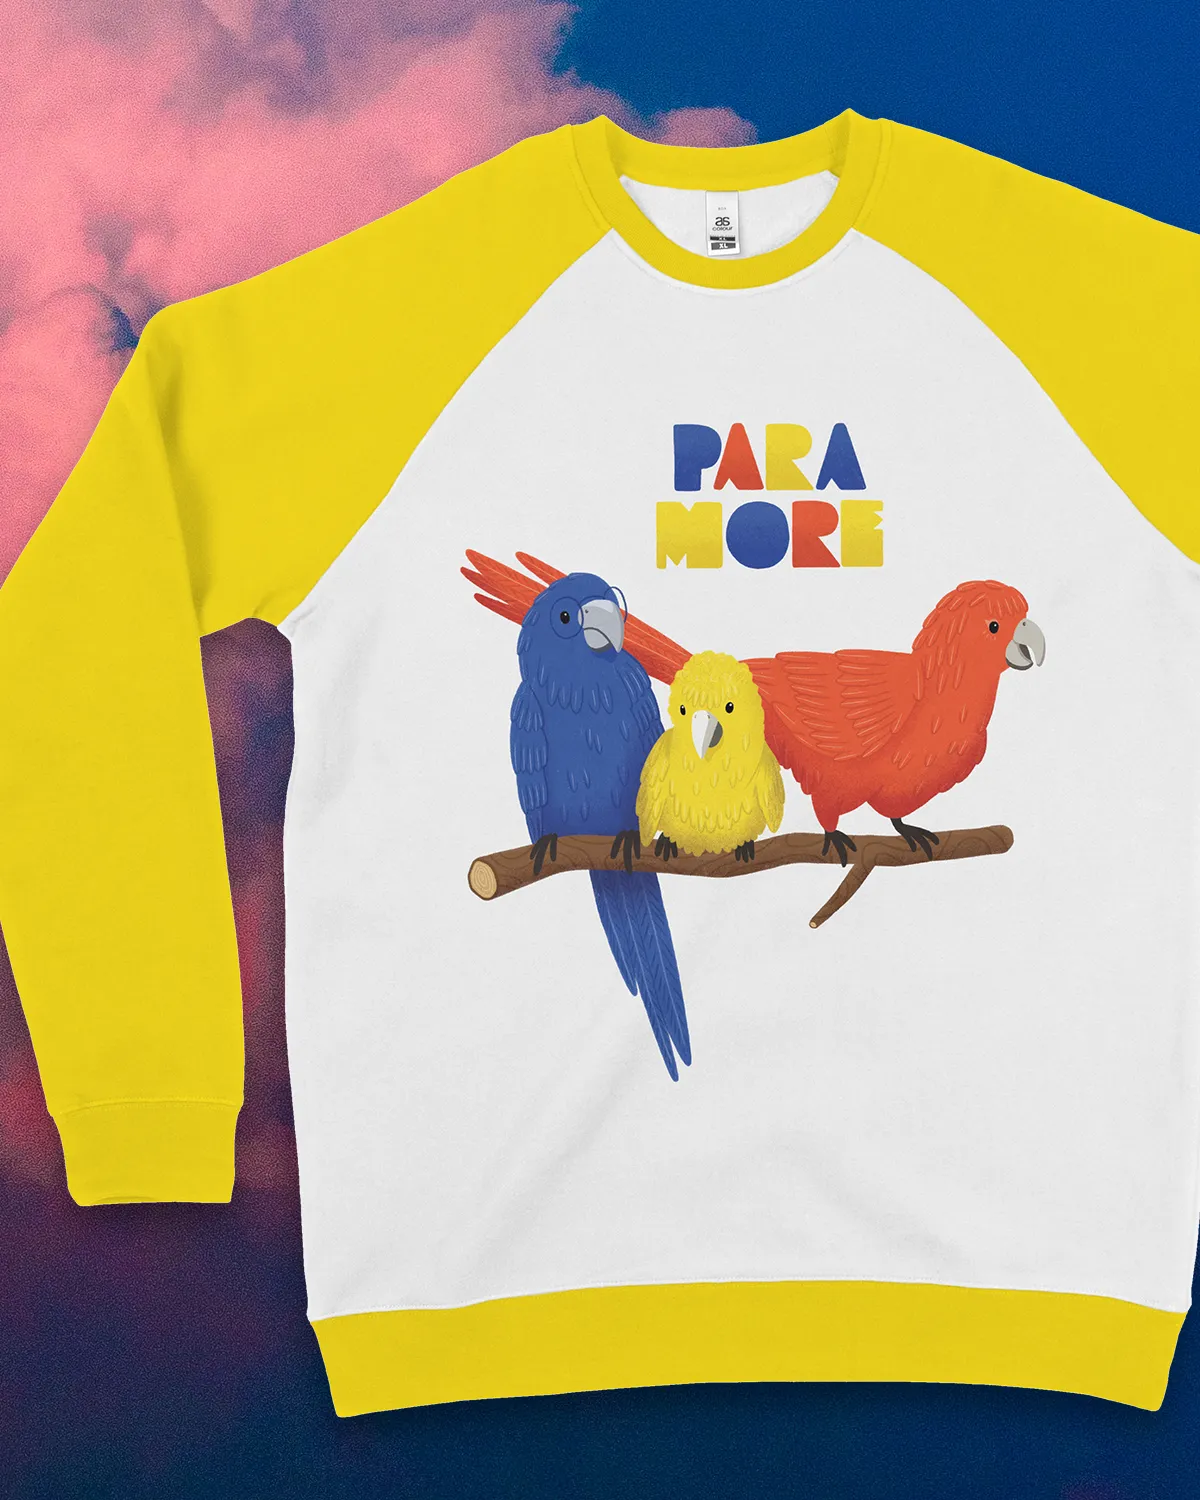 Paramore Impericon: Sweater featuring the parrots design.